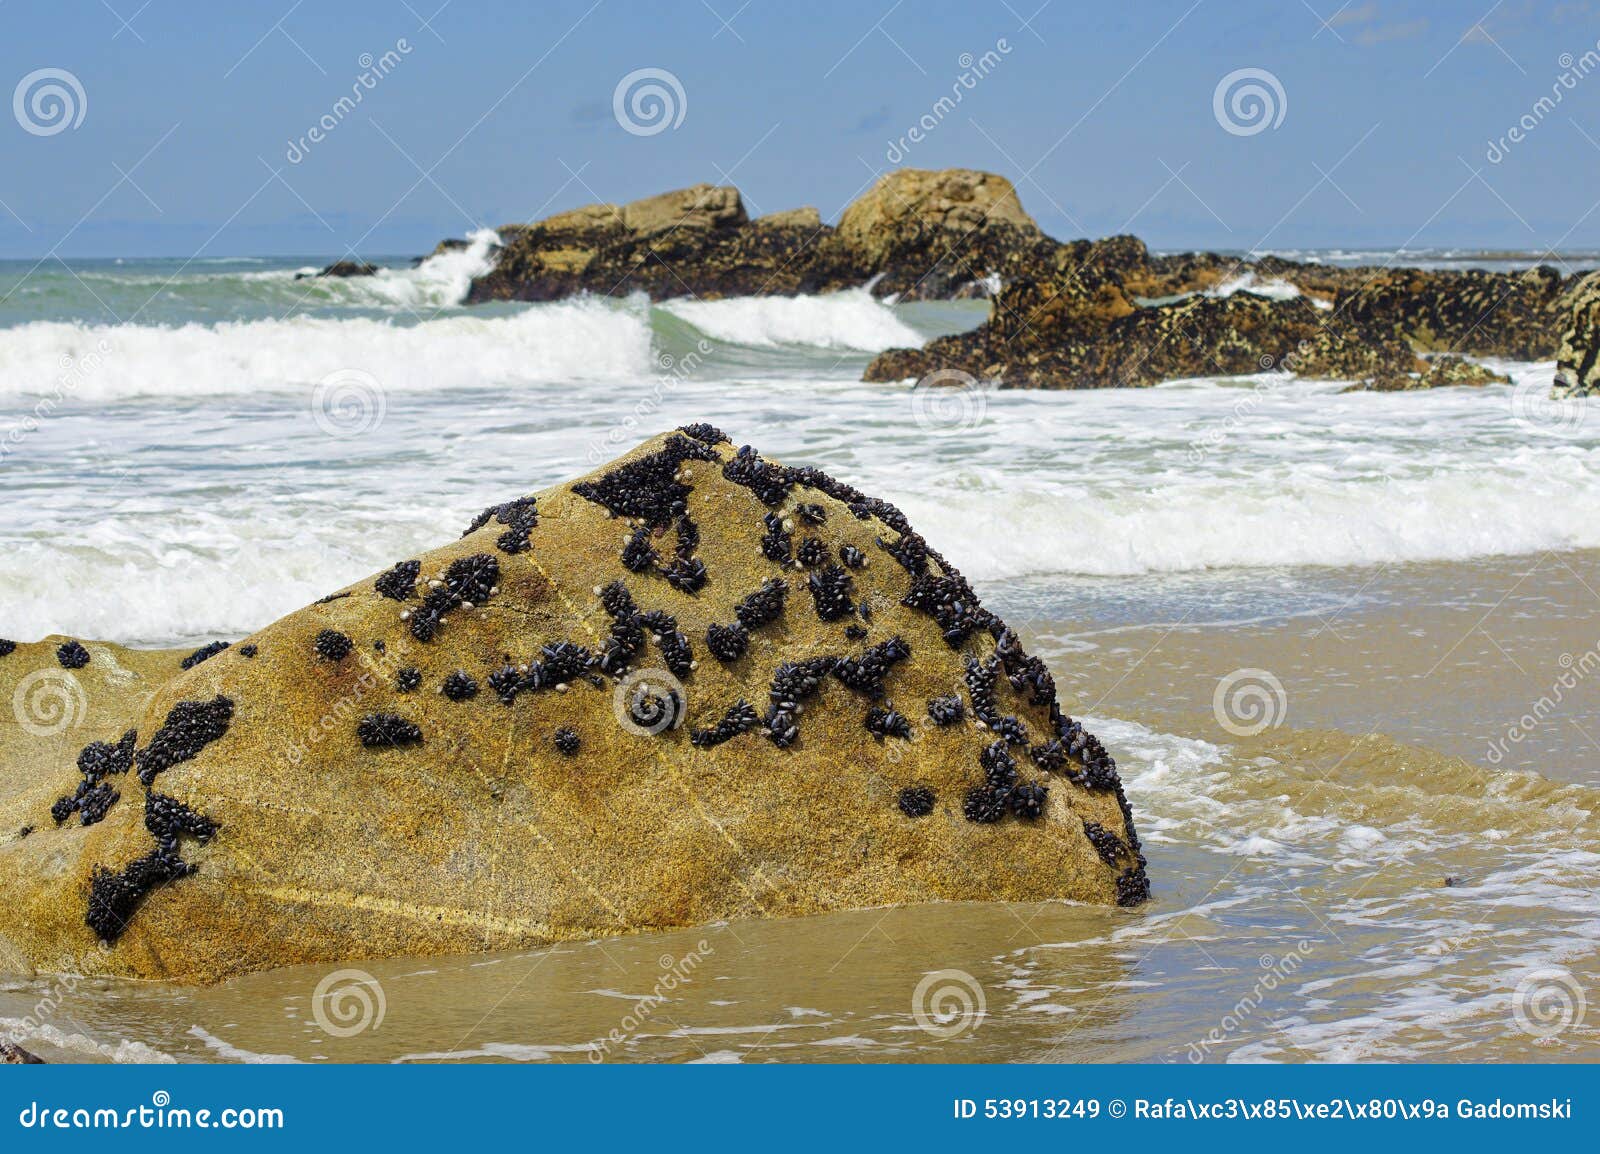 the mussels colony in parque natural do litoral